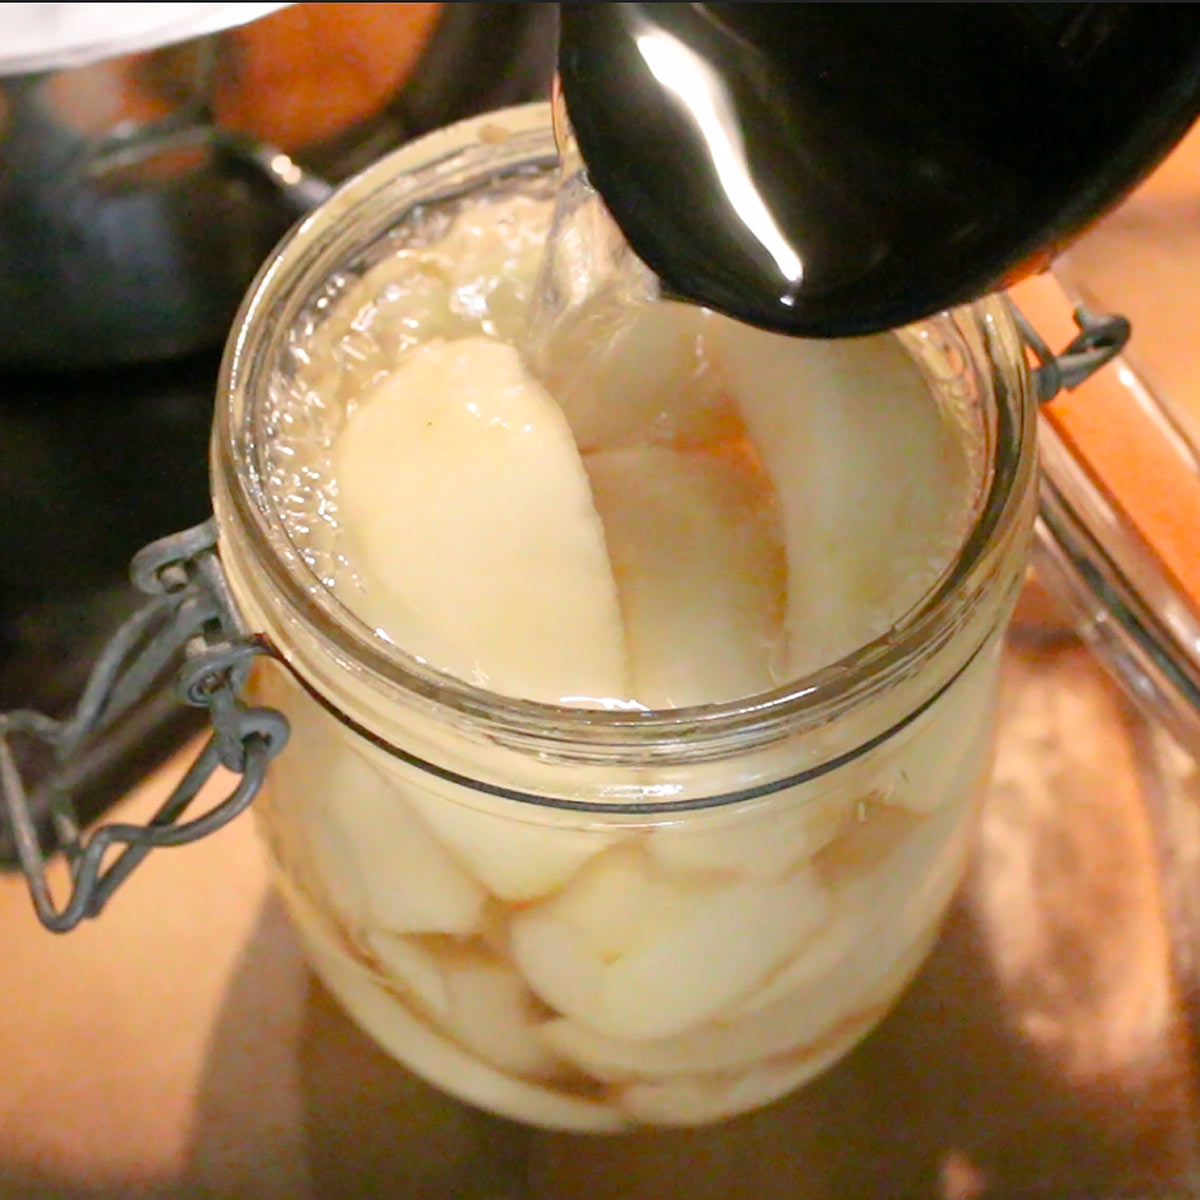 pour homemade syrup over pears in the jar